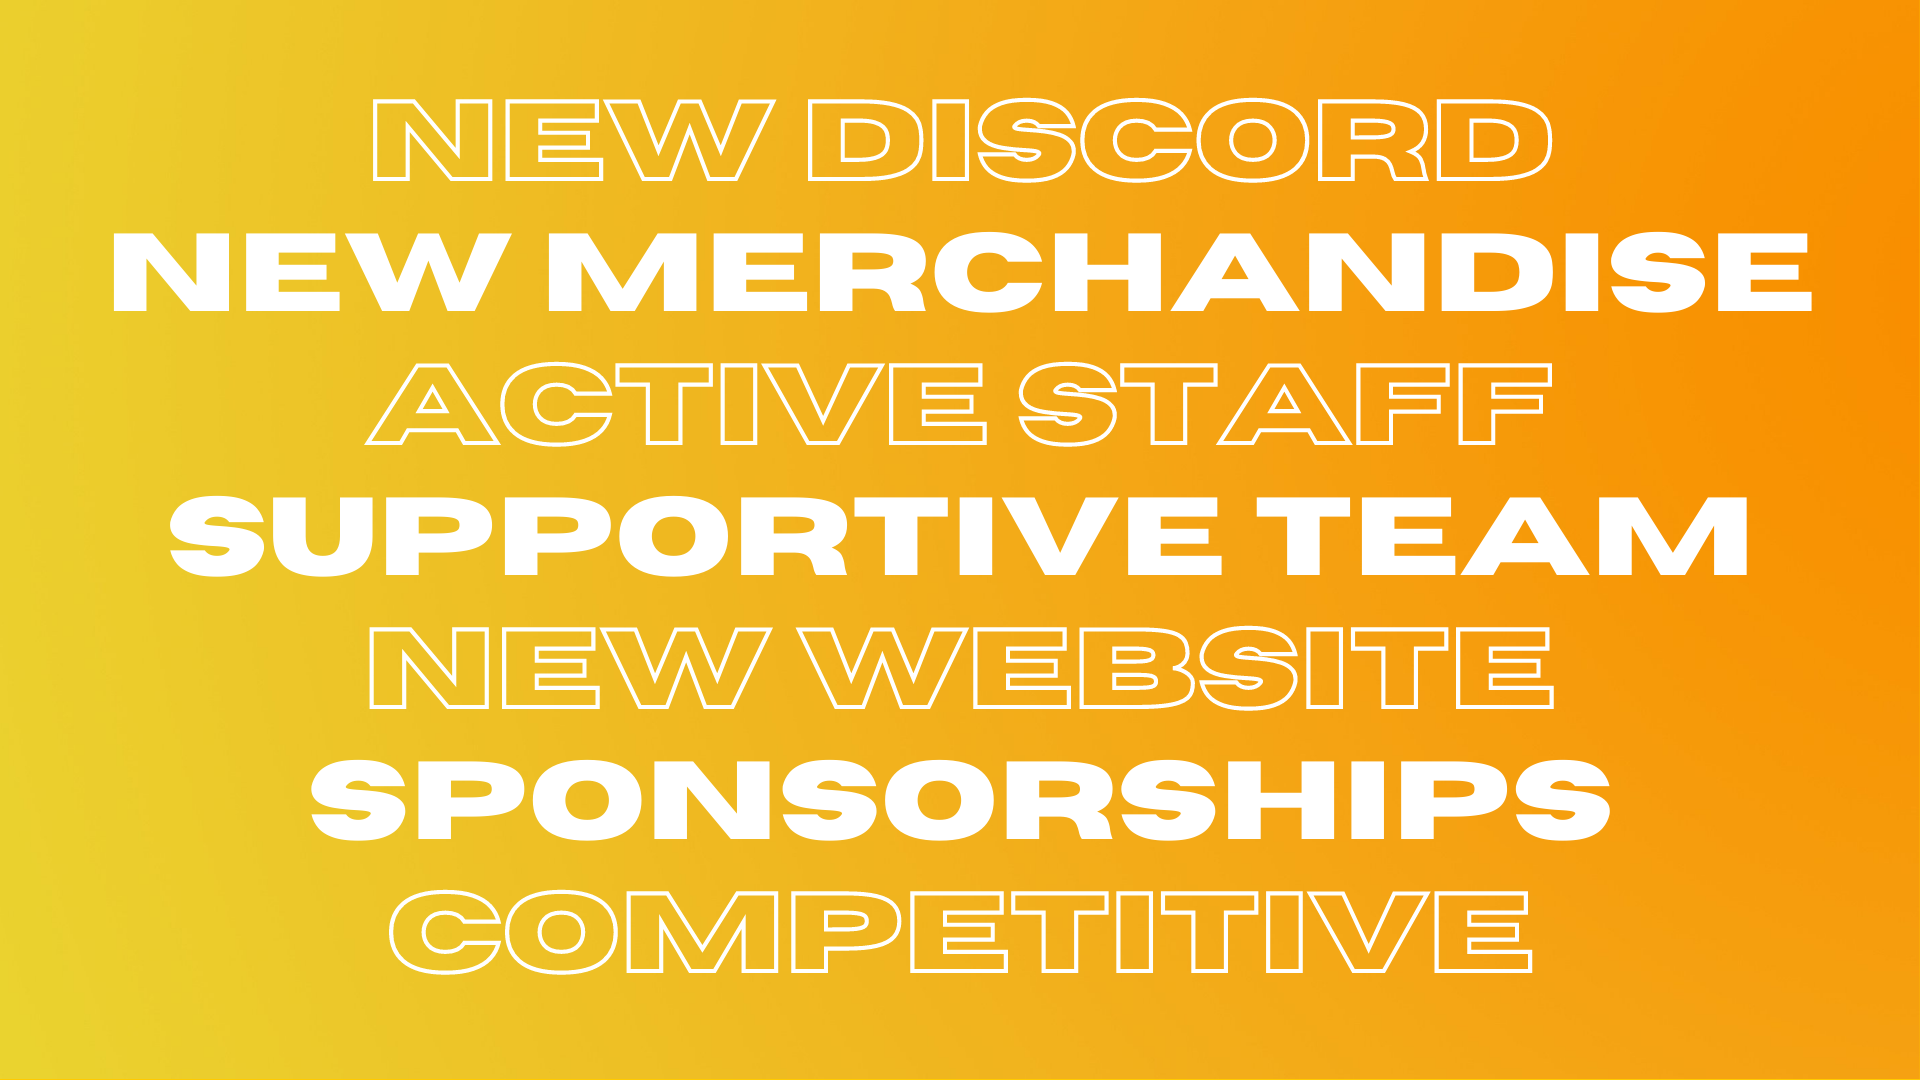 NEW DISCORD NEW MERCHANDISE ACTIVE STAFF SUPPORTIVE TEAM NEW WEBSITE SPONSORSHIPS COMPETITIVE